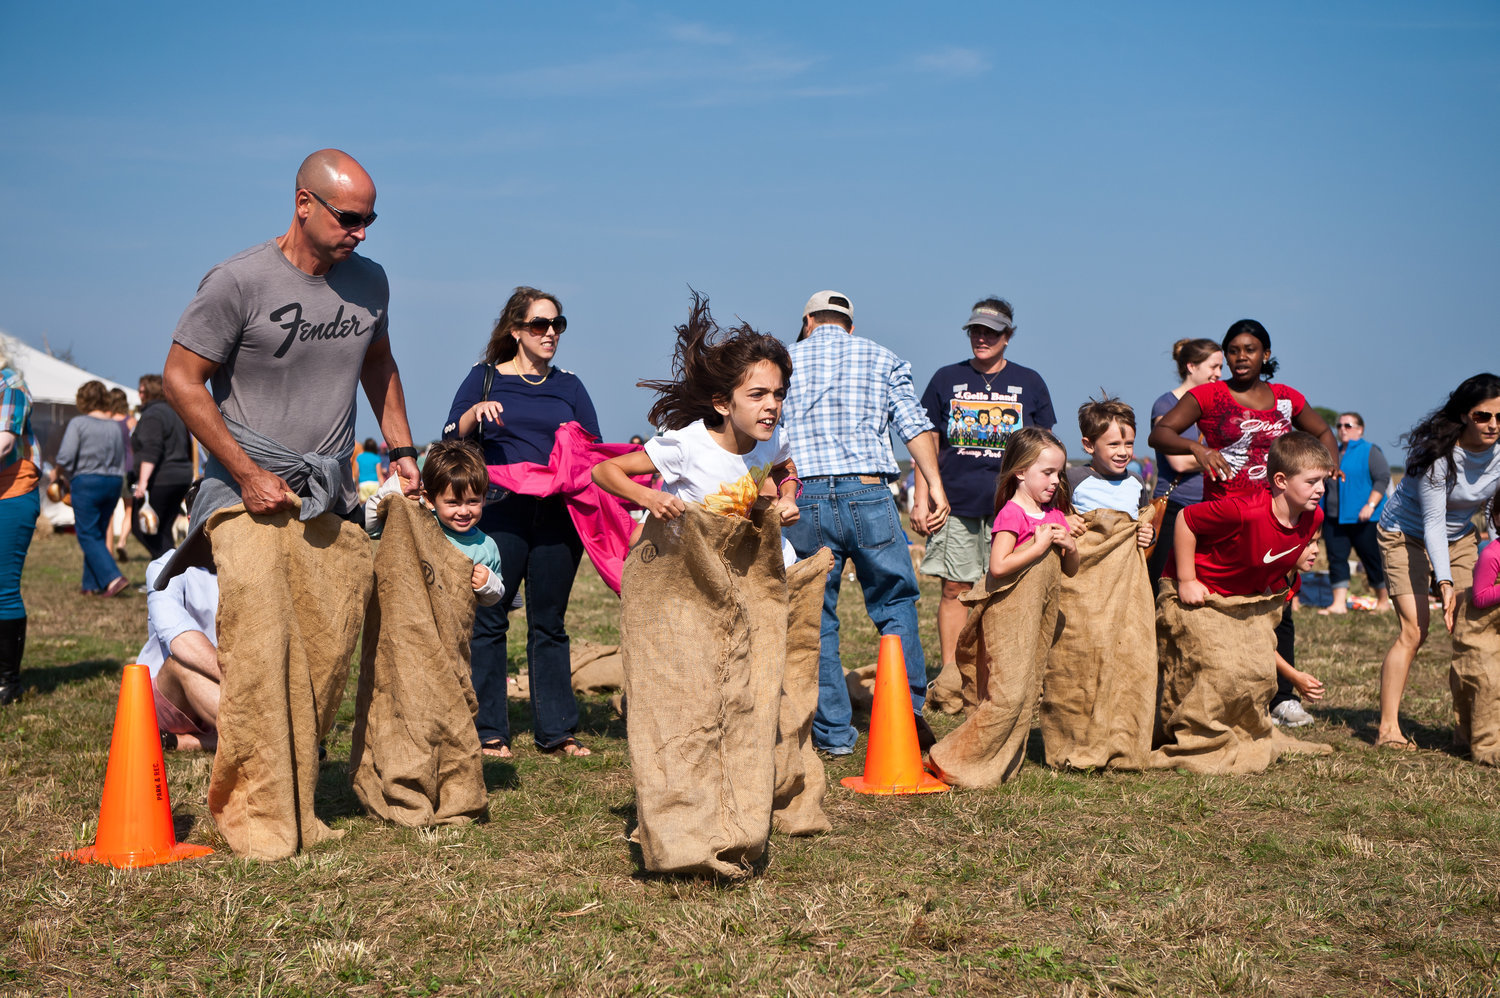 Old-fashioned fun and games like sack races will be featured at this weekend’s Harvest Fair at the Nantucket Conservation Foundation’s Milestone Cranberry Bog at 220 Milestone Road.